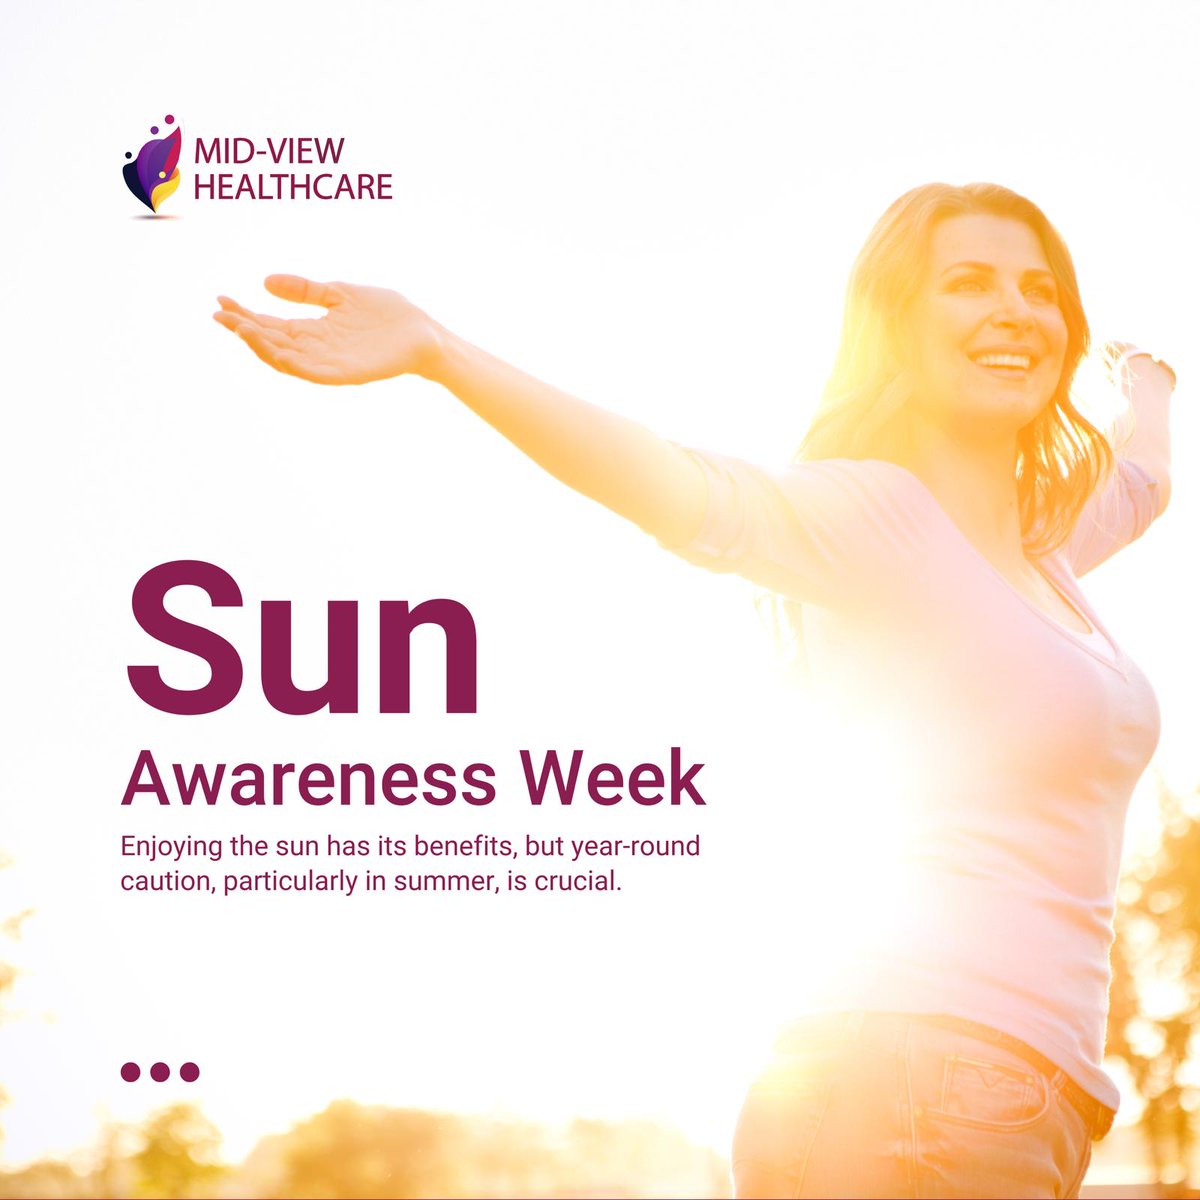 ☀️ It's Sun Awareness Week! 🌞
As we soak up the sunshine, let's also remember to protect our skin. Whether you're enjoying a stroll in the park or lounging by the beach, wearing sunscreen is a must. Let's keep our skin healthy and happy! #SunAwarenessWeek #SkinCare #StaySafe ☀️